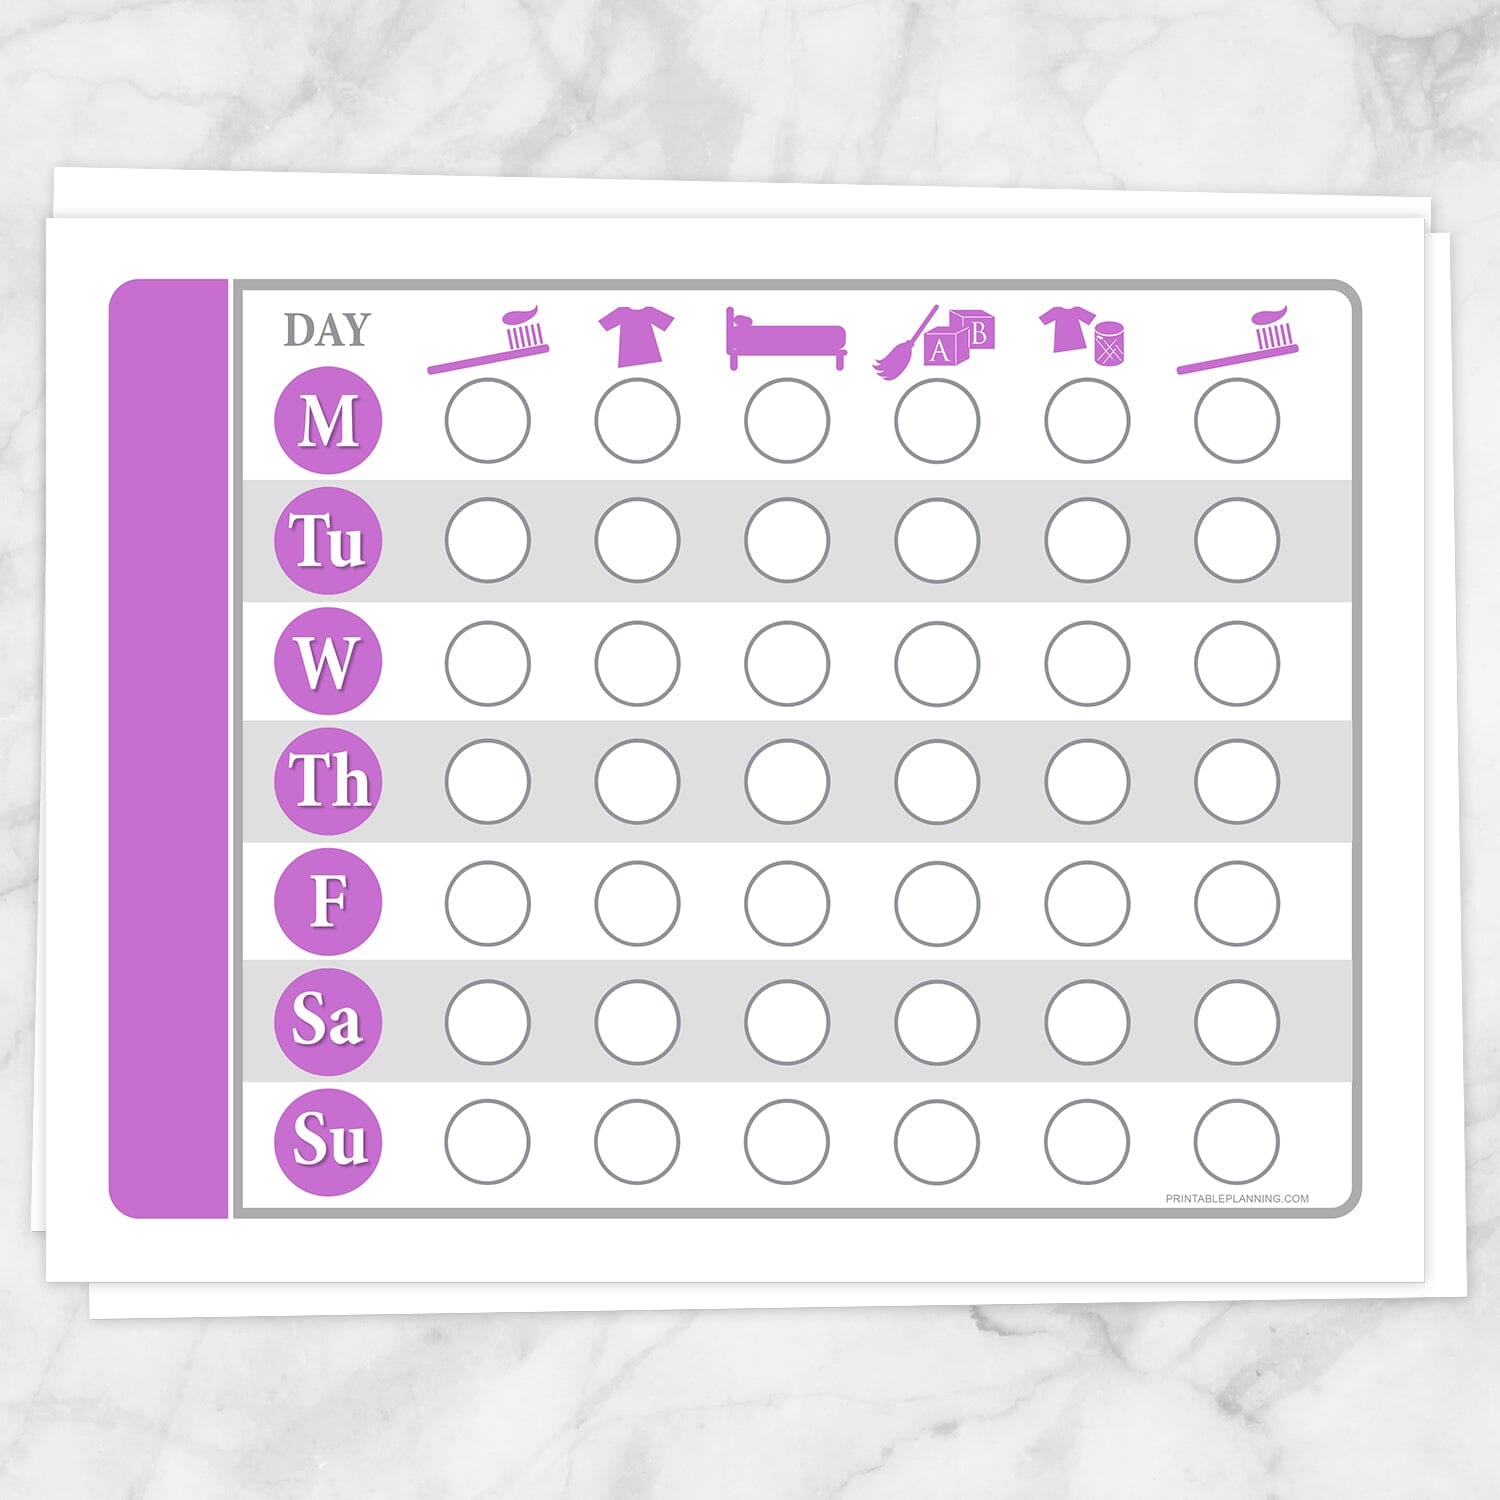 Printable Toddler Chore Chart - Purple Girl Daily Routine Weekly Page at Printable Planning.